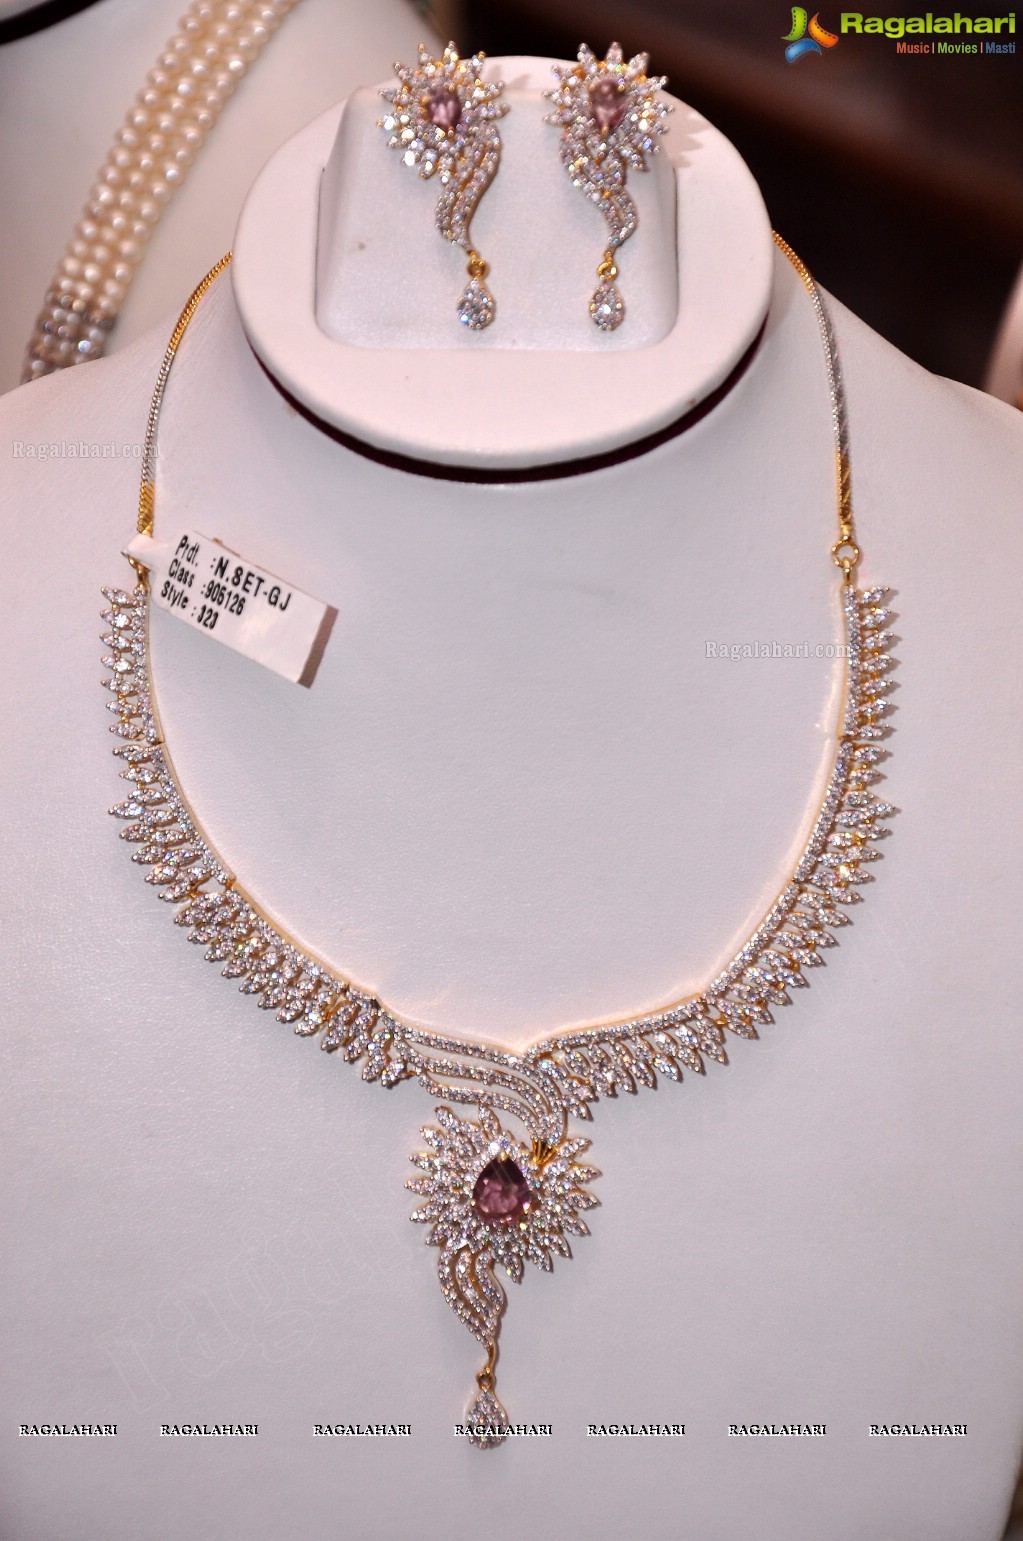 New Collection of Imitation Jewellery launch at New Victoria Pearls Showroom, Hyderabad